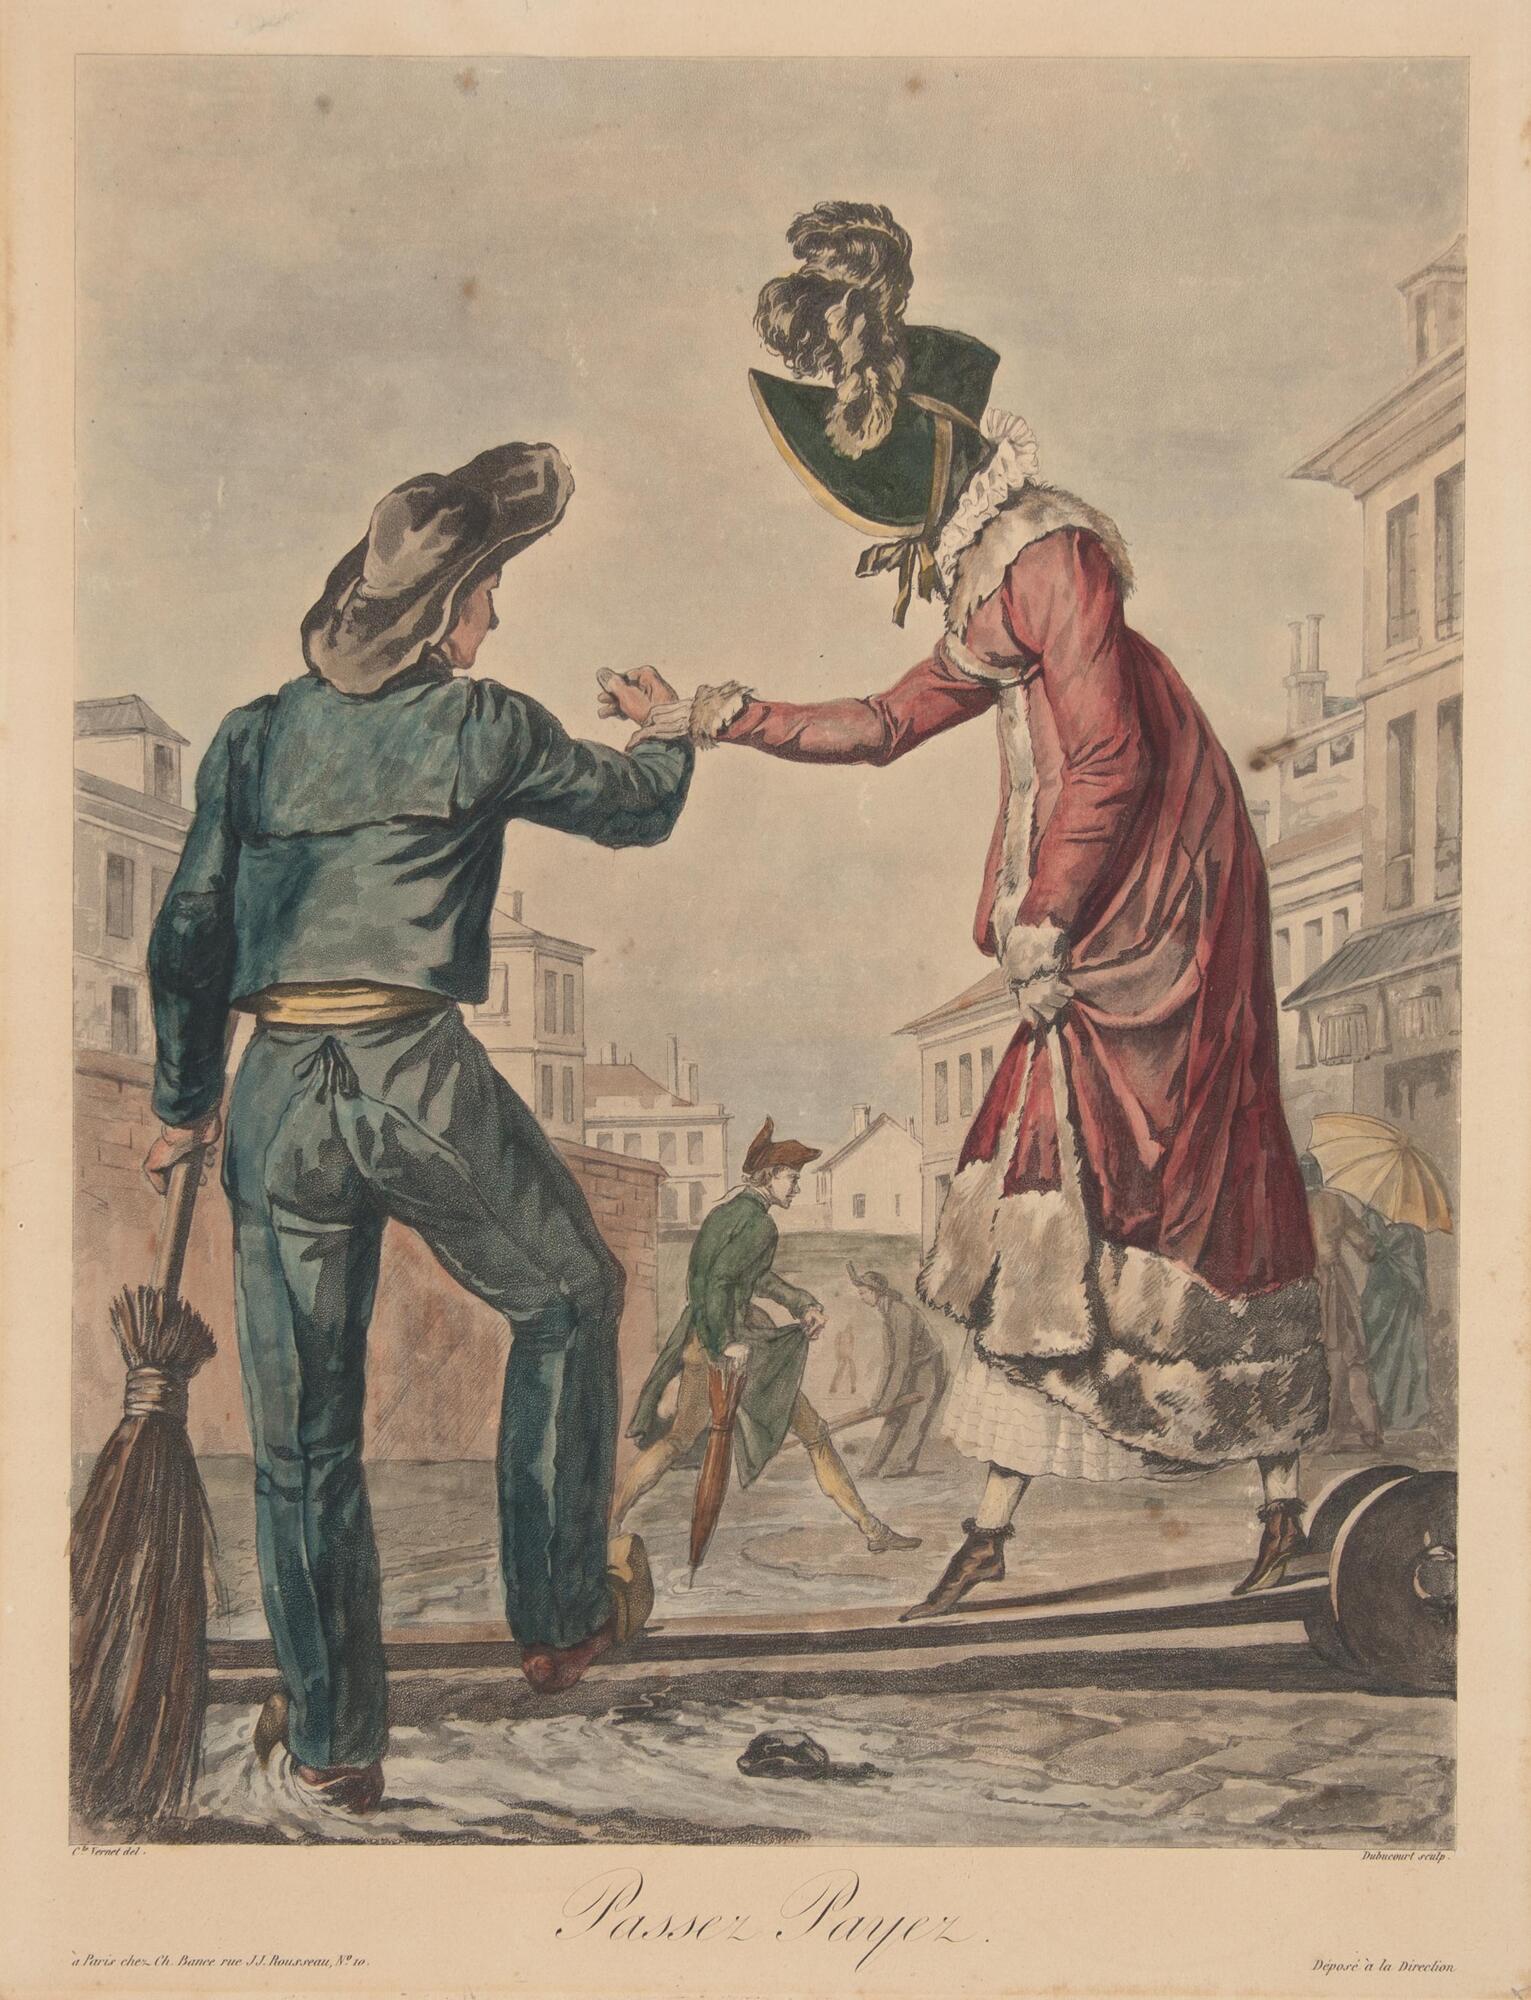 A man holding on to a woman&#39;s hand, helping her walk across. He is holding a broom in the other hand, she is wearing a formal dress. There is a busy street behind.